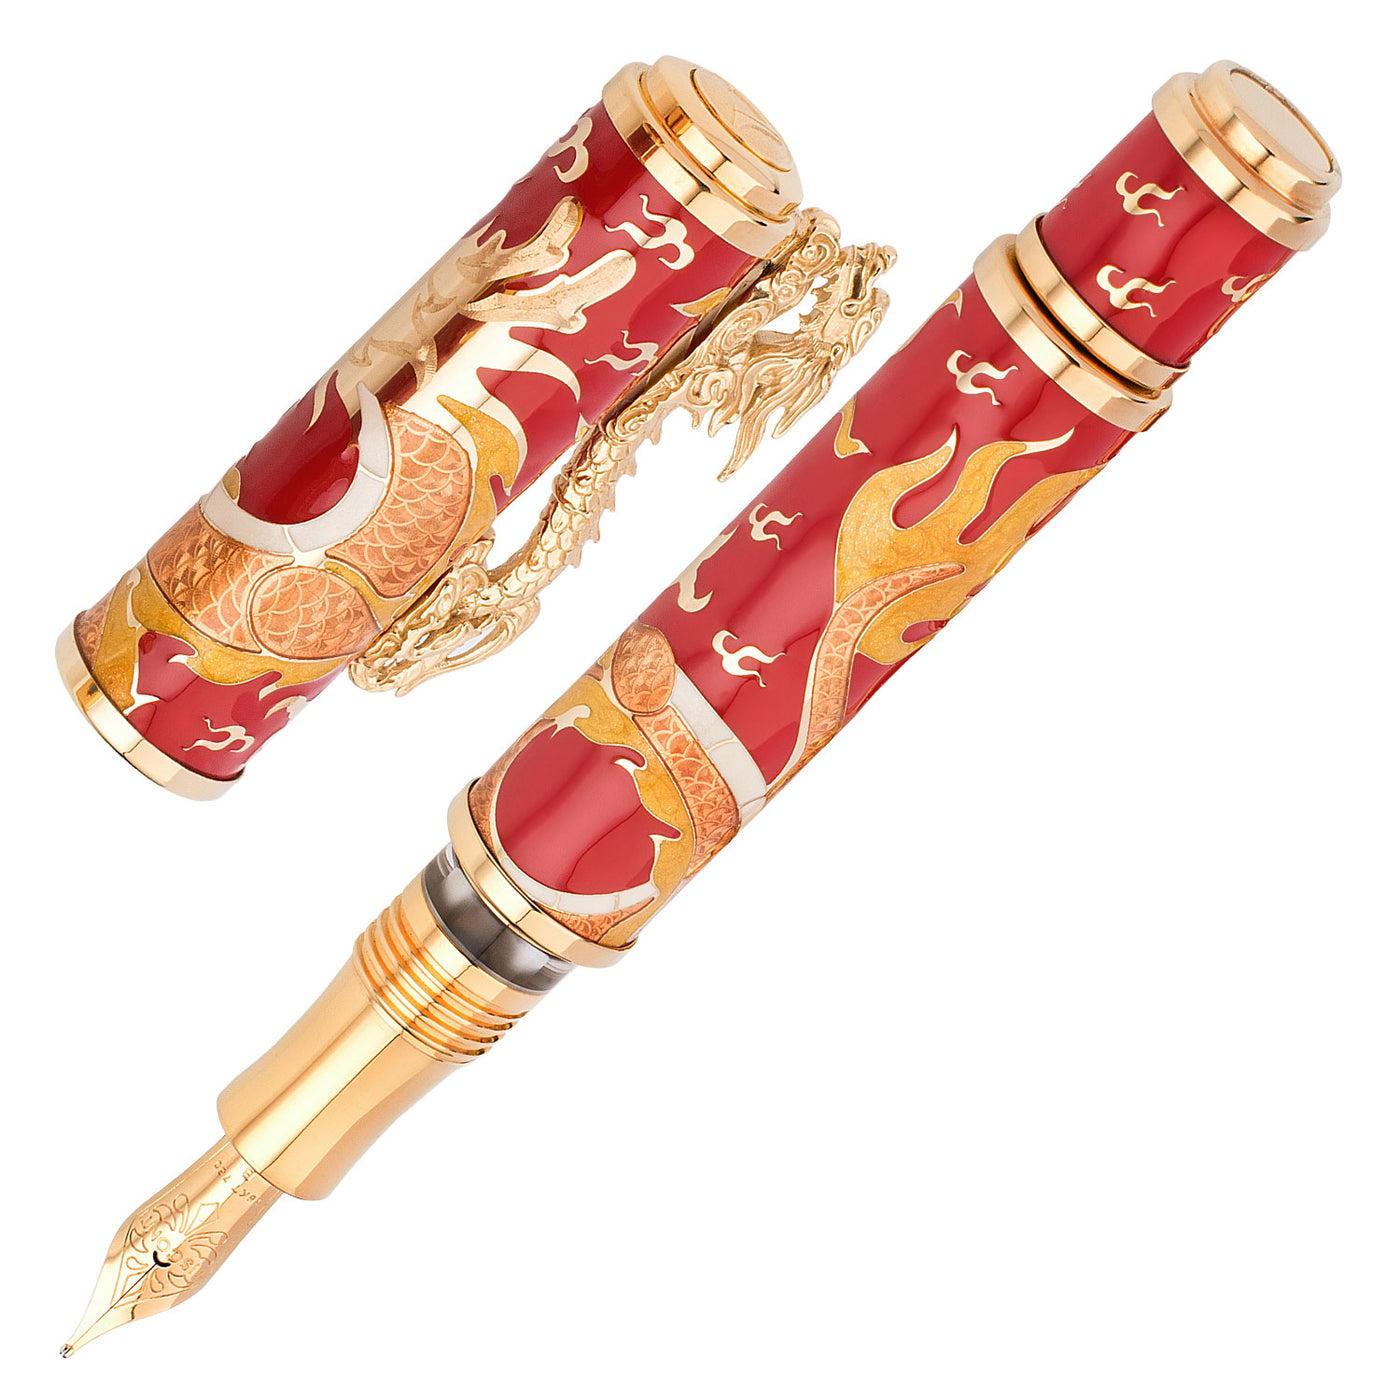 Visconti Year of the Dragon Limited Edition Fountain Pen 1